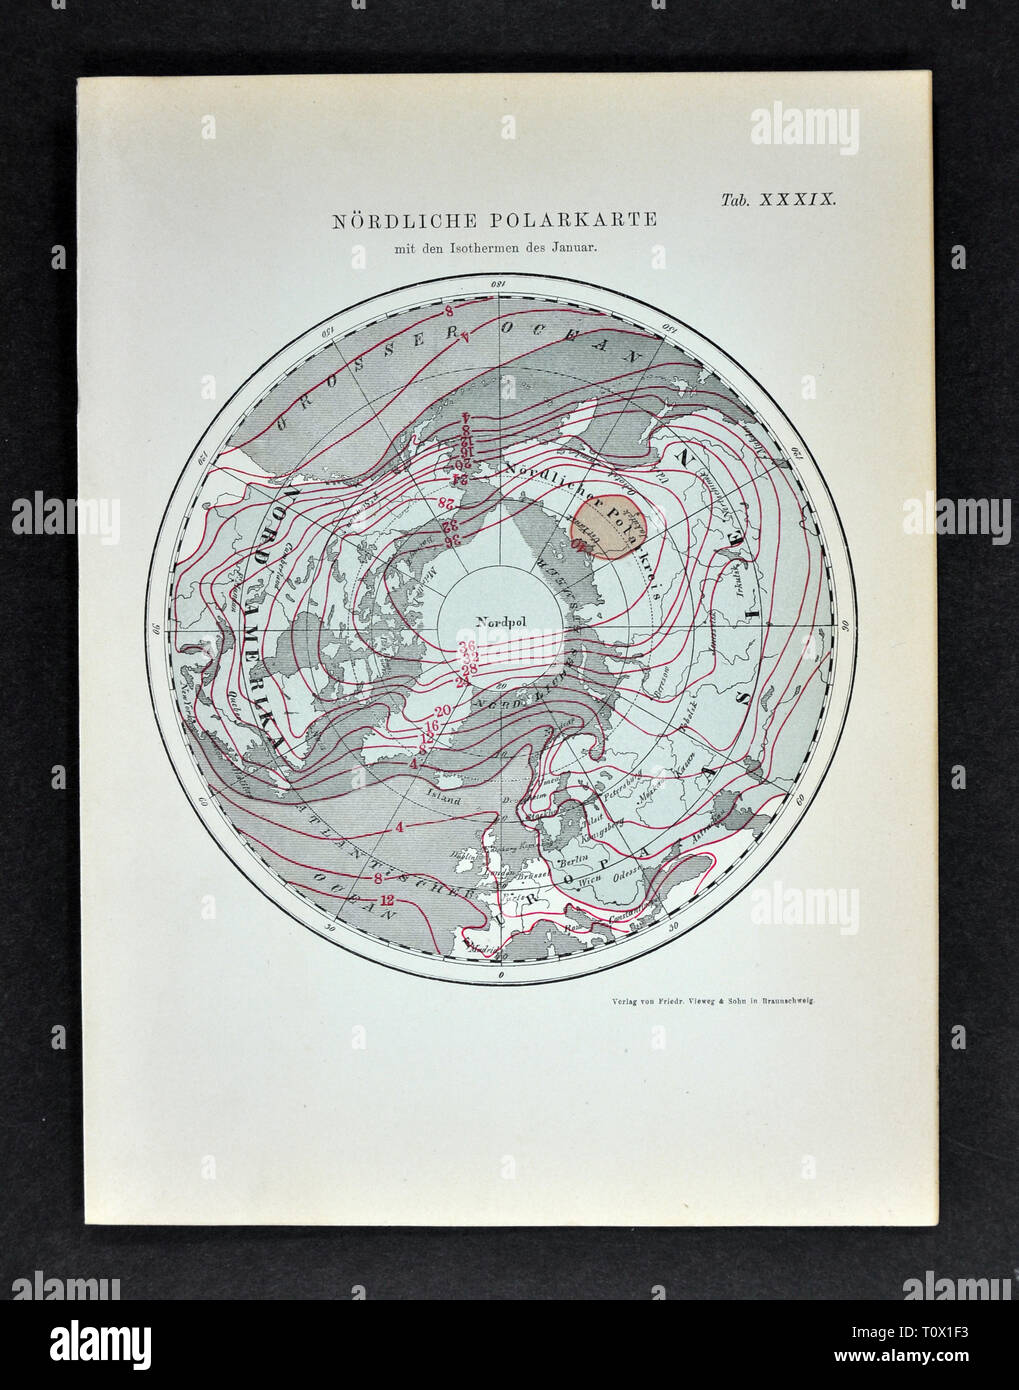 1894 Muller Weather Map of the Arctic South Pole showing the Isothermic Temperature during January and the Polar Vortex over Siberia Stock Photo